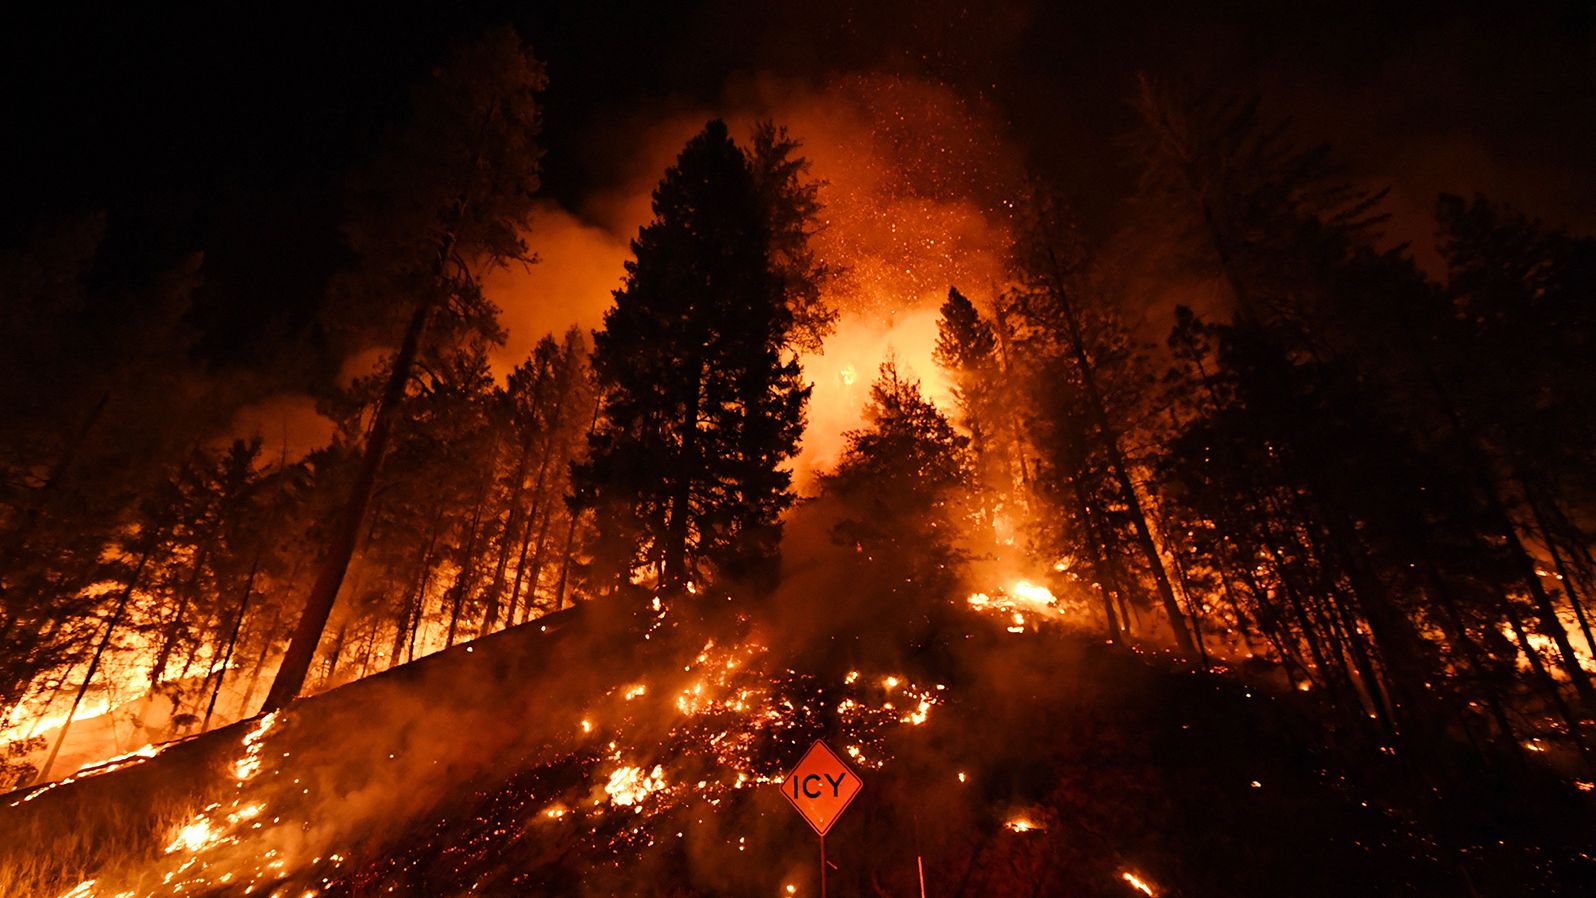 Two firefighters were killed in the 2018 Carr Fire.